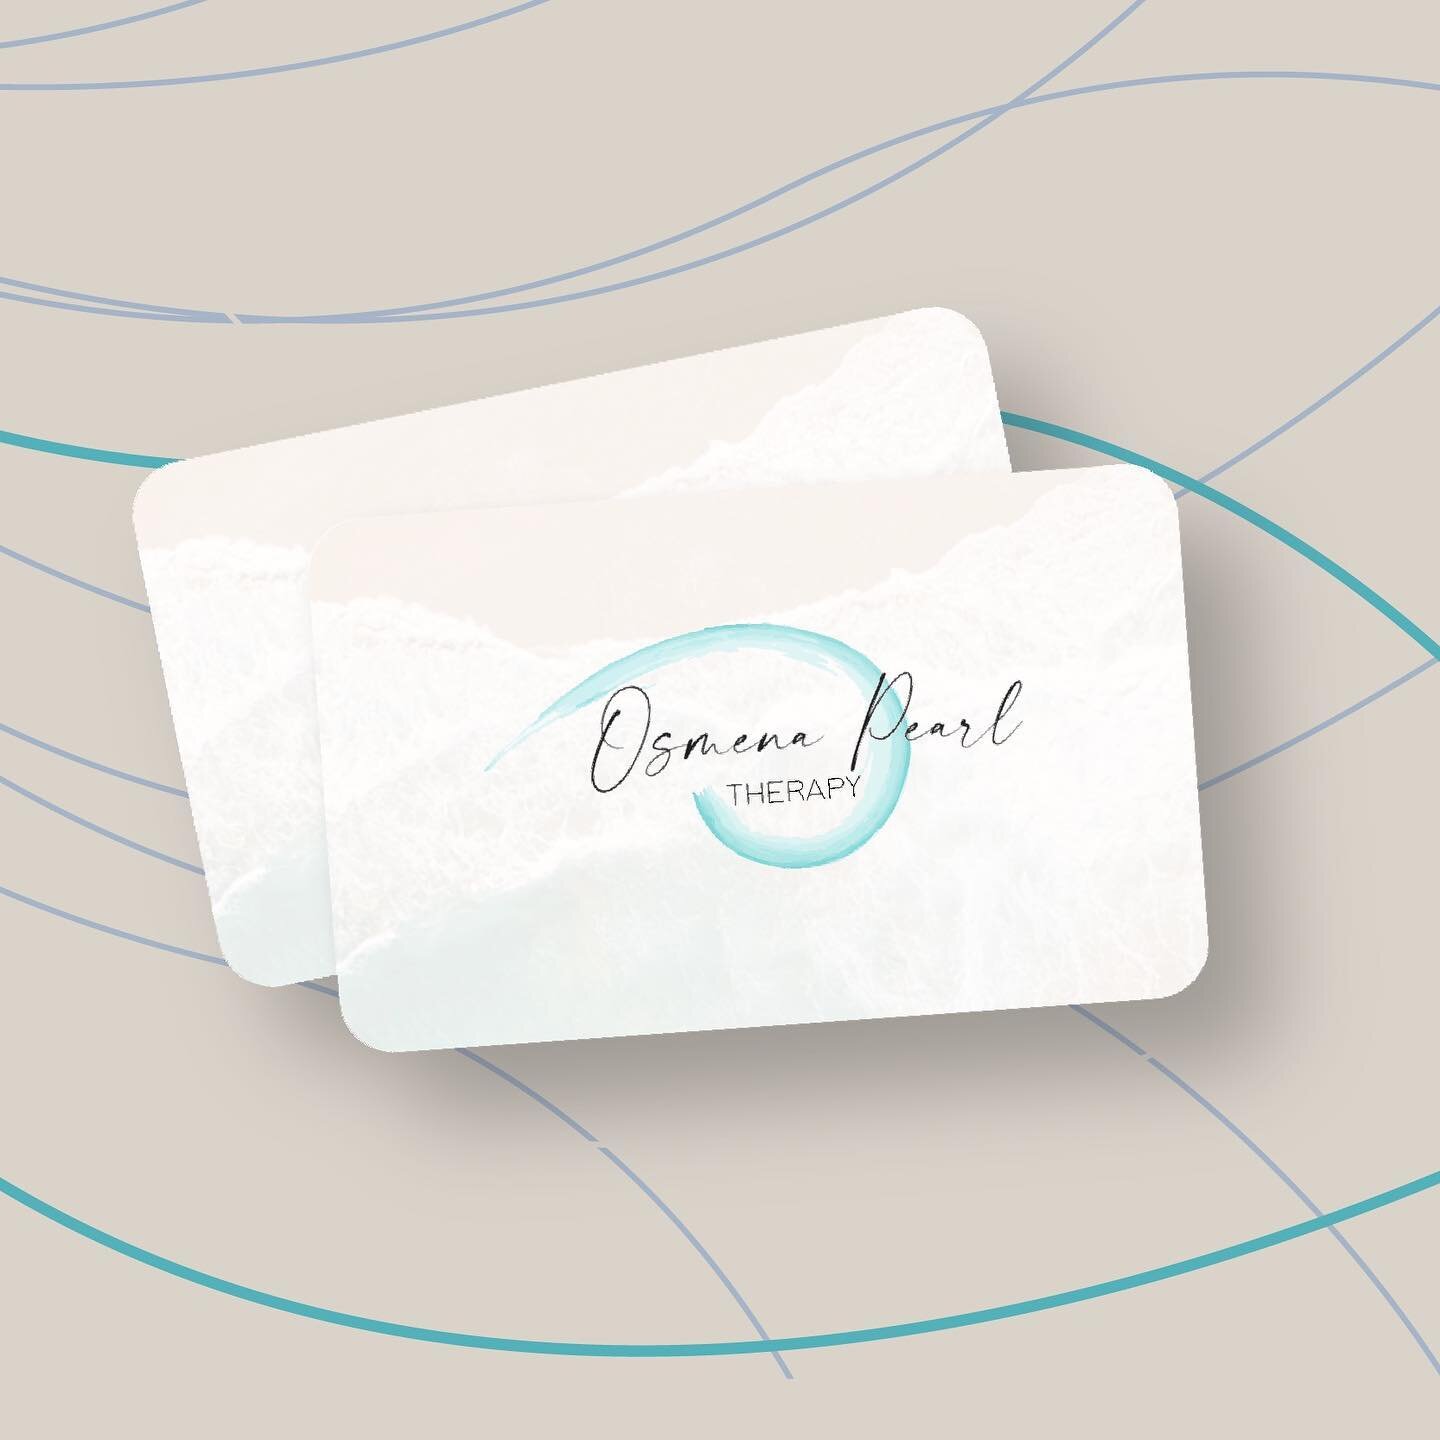 Move beyond material presents this year, and give your loved ones the gift of wellness 💆&zwj;♀️ 

We offer gift cards + massage packages 💝 

Shop now: www.osmenapearltherapy.com #linkinbio